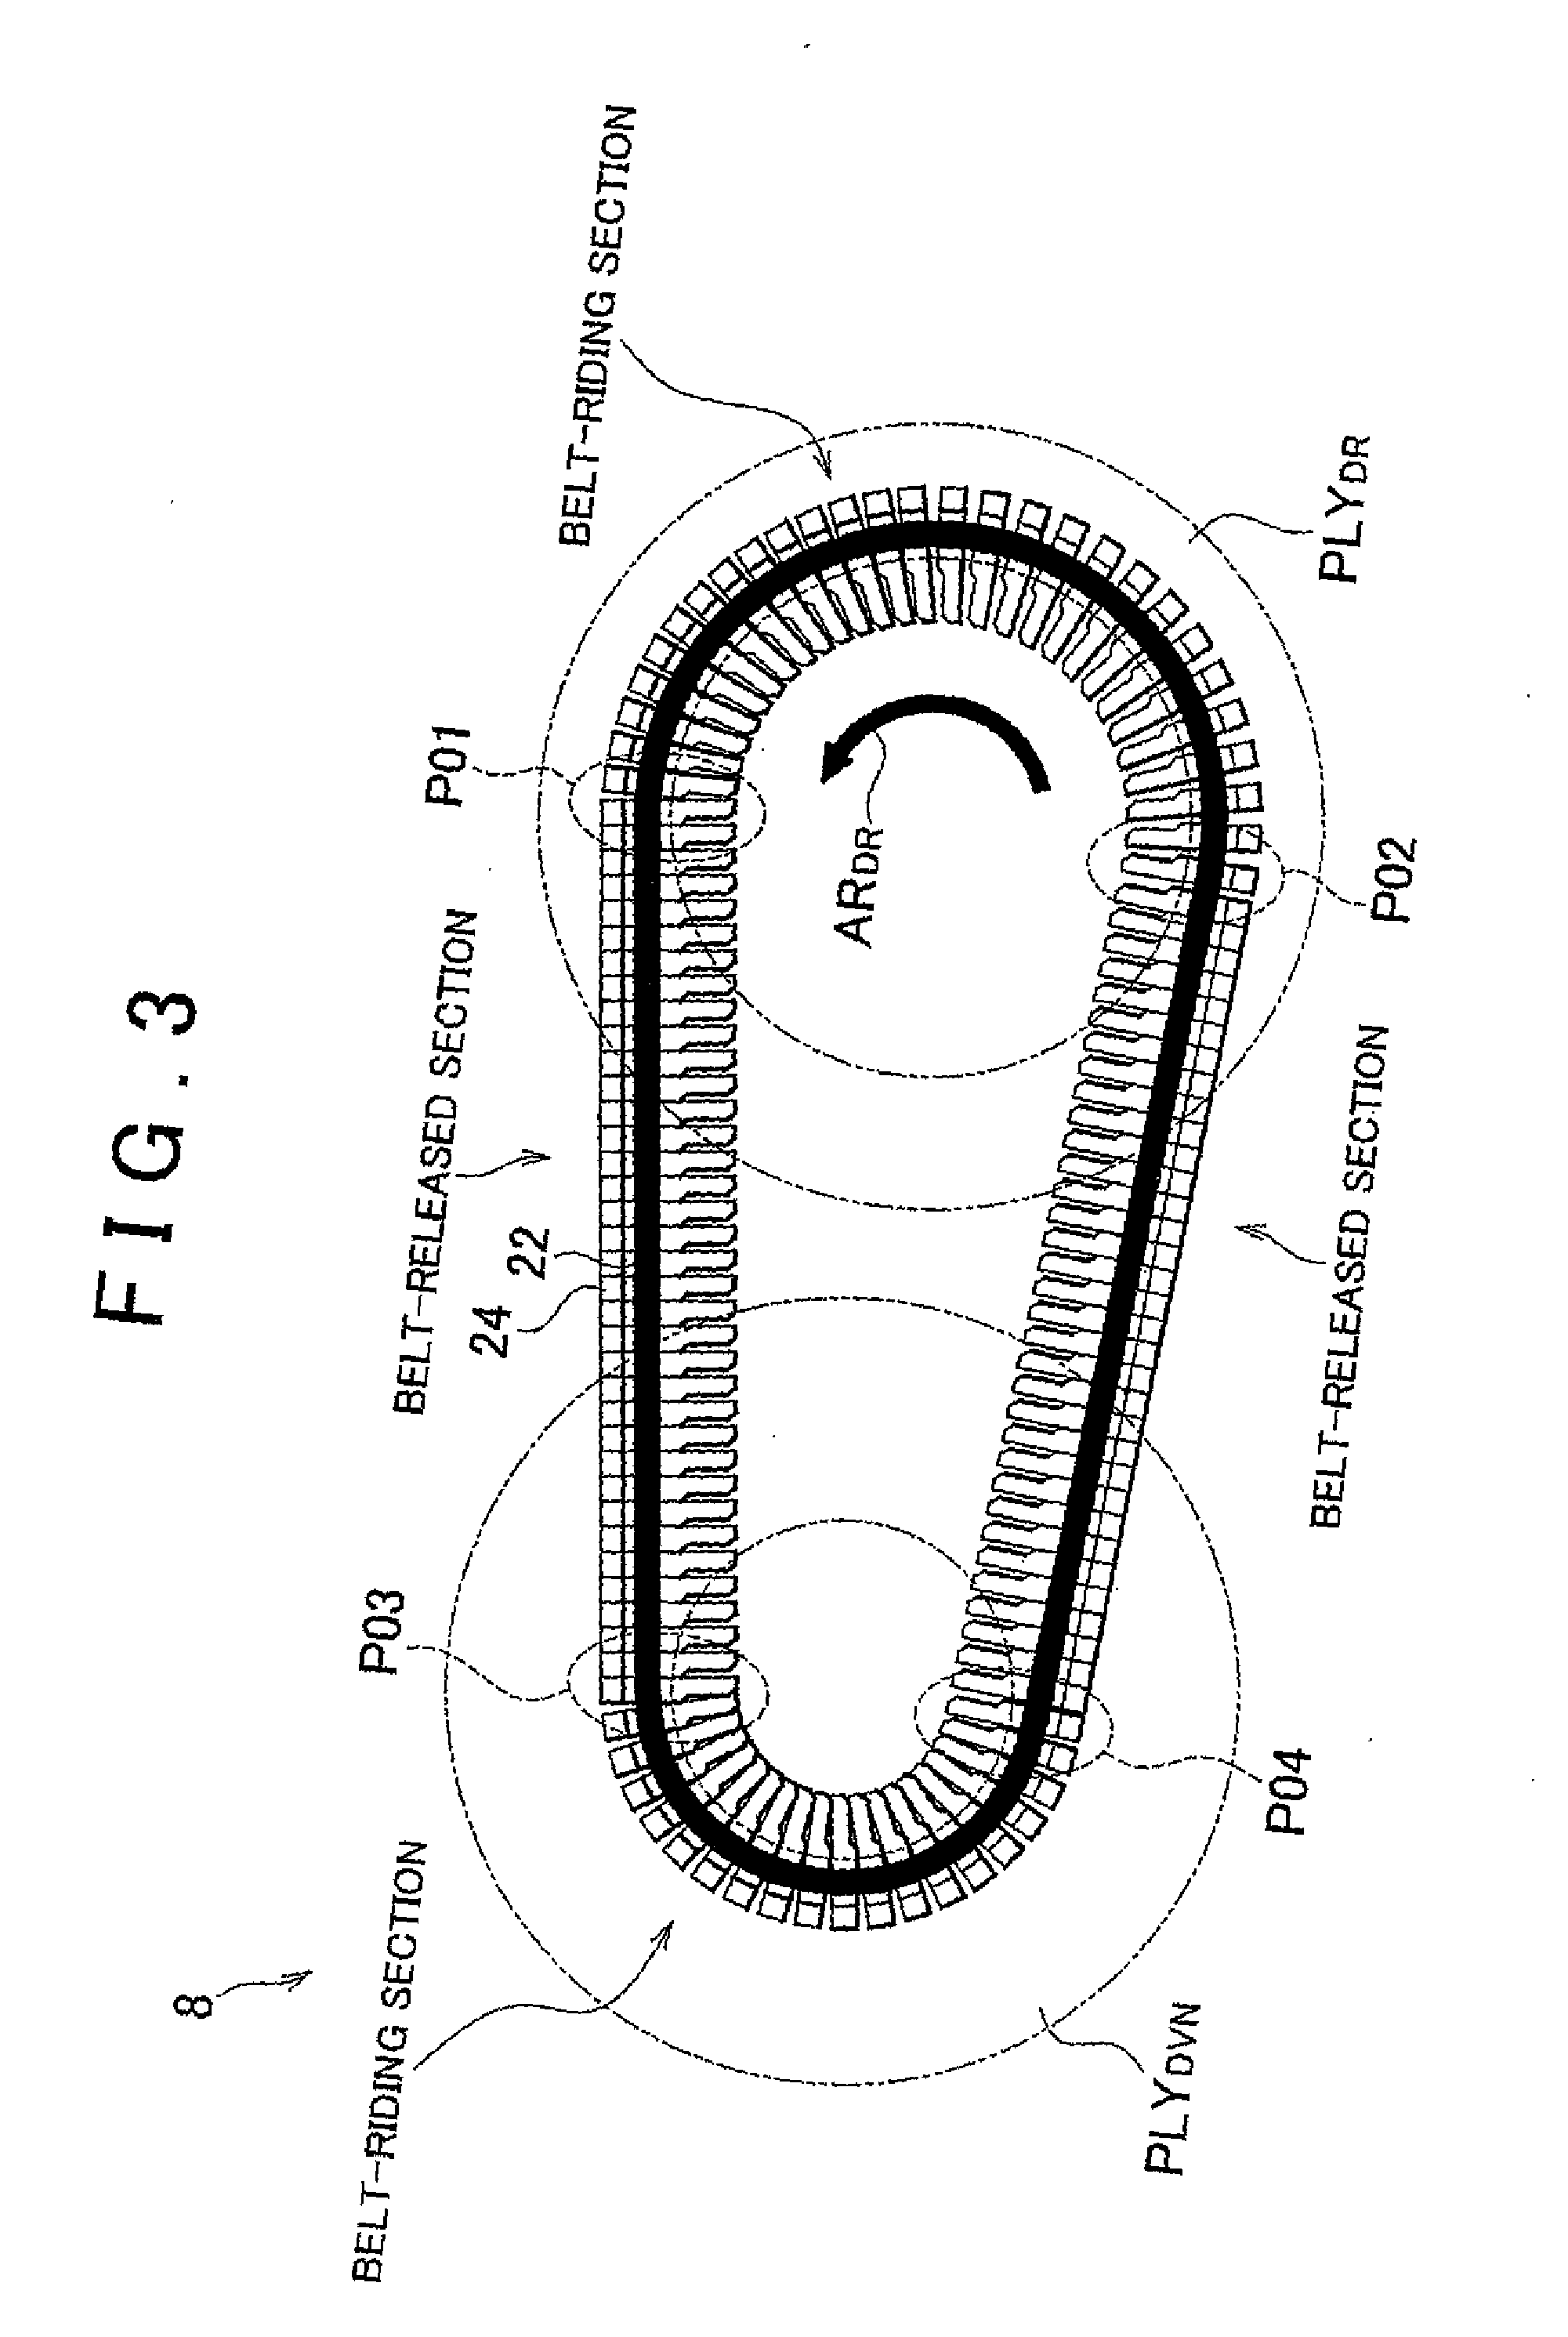 Elements of drive power transfer belt of belt-drive continuously variable transmission for vehicle